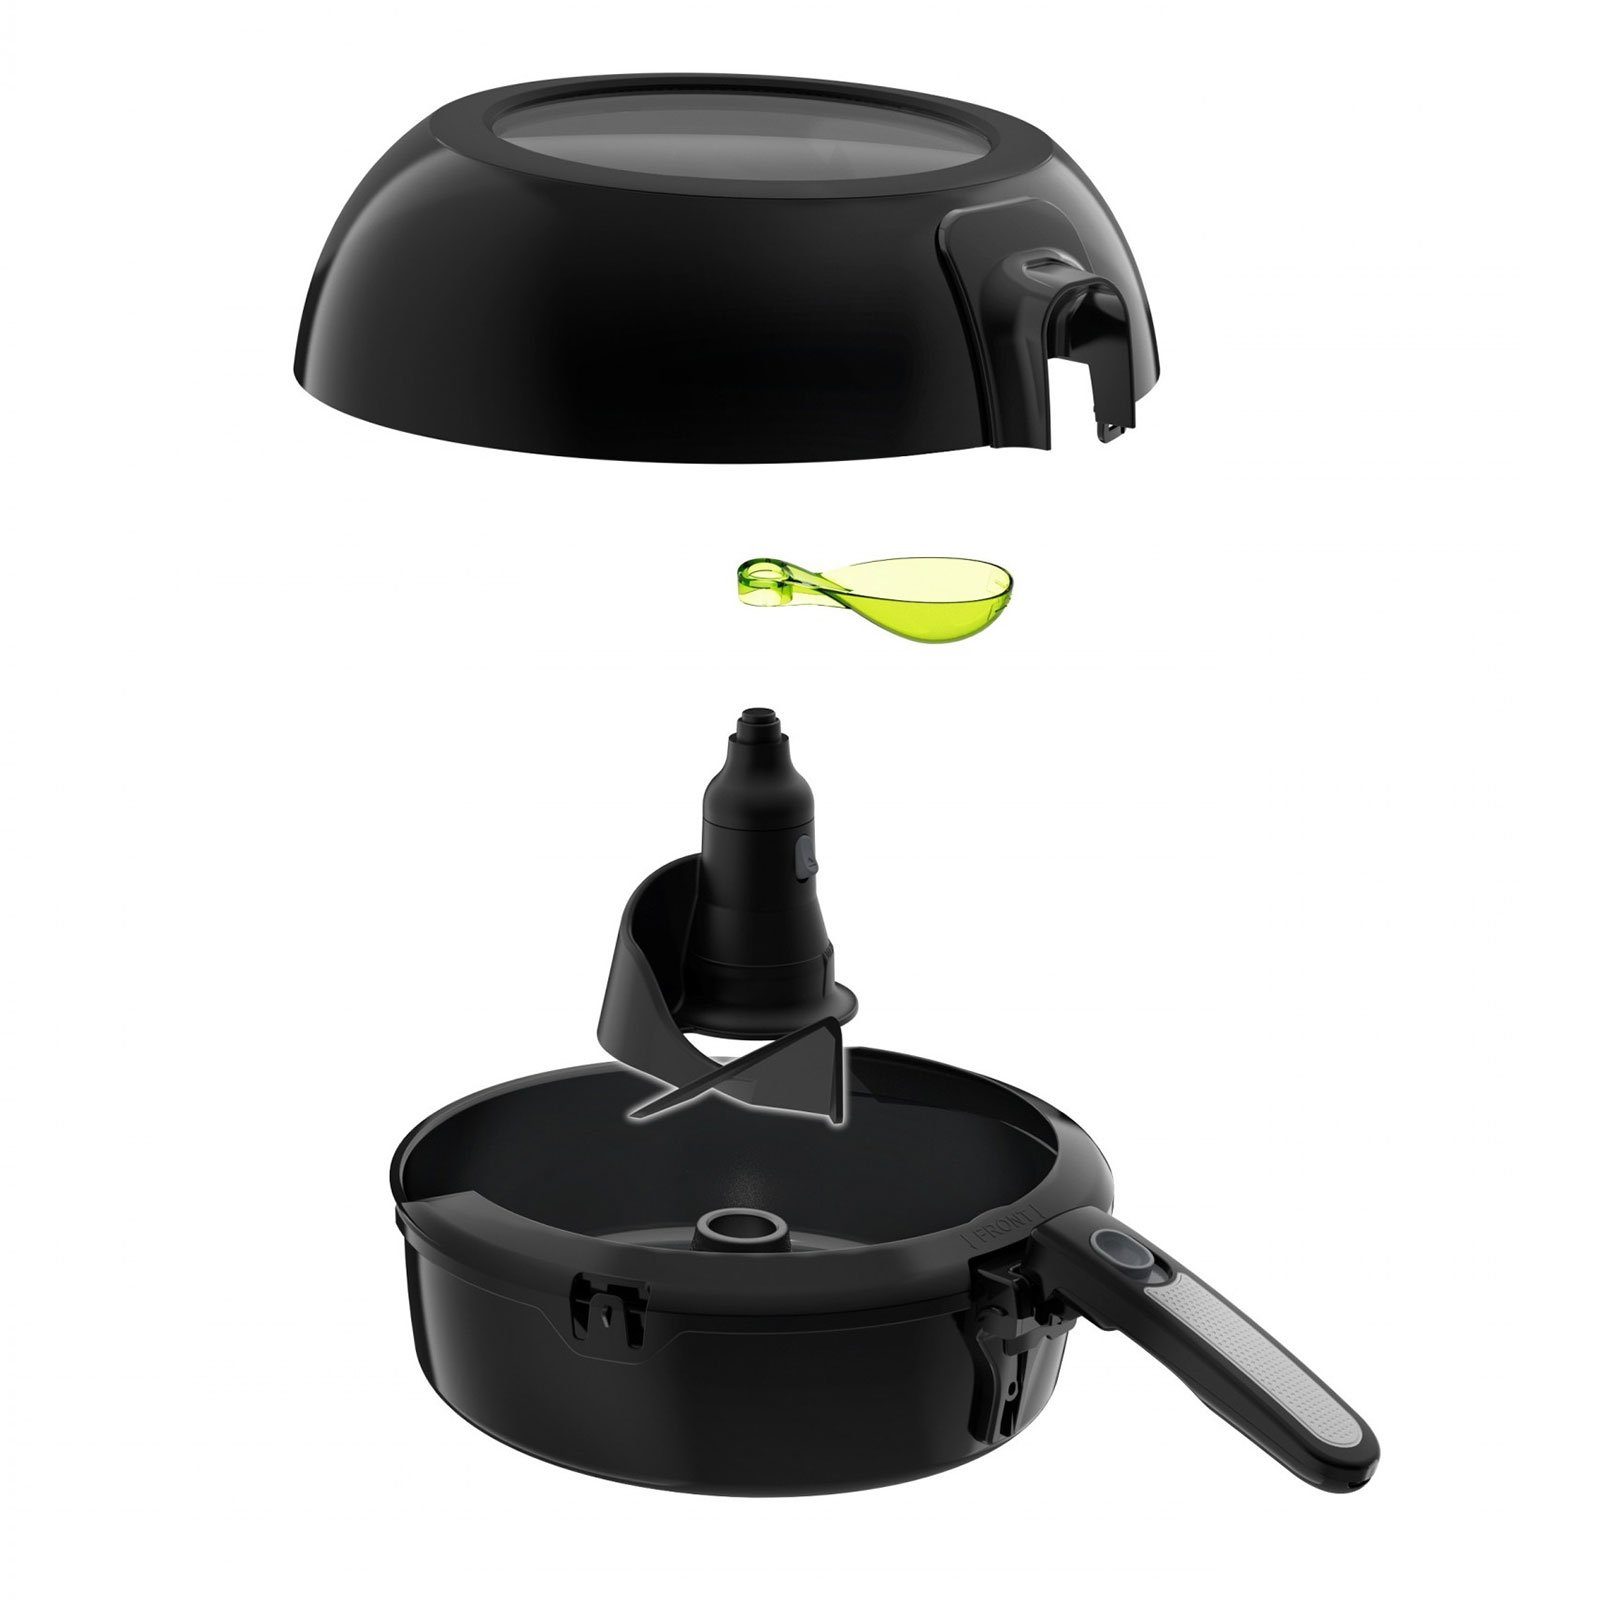 ActiFry FZ Tefal Smart W Heißluft-Fritteuse, 1550 773815 Genius Fritteuse